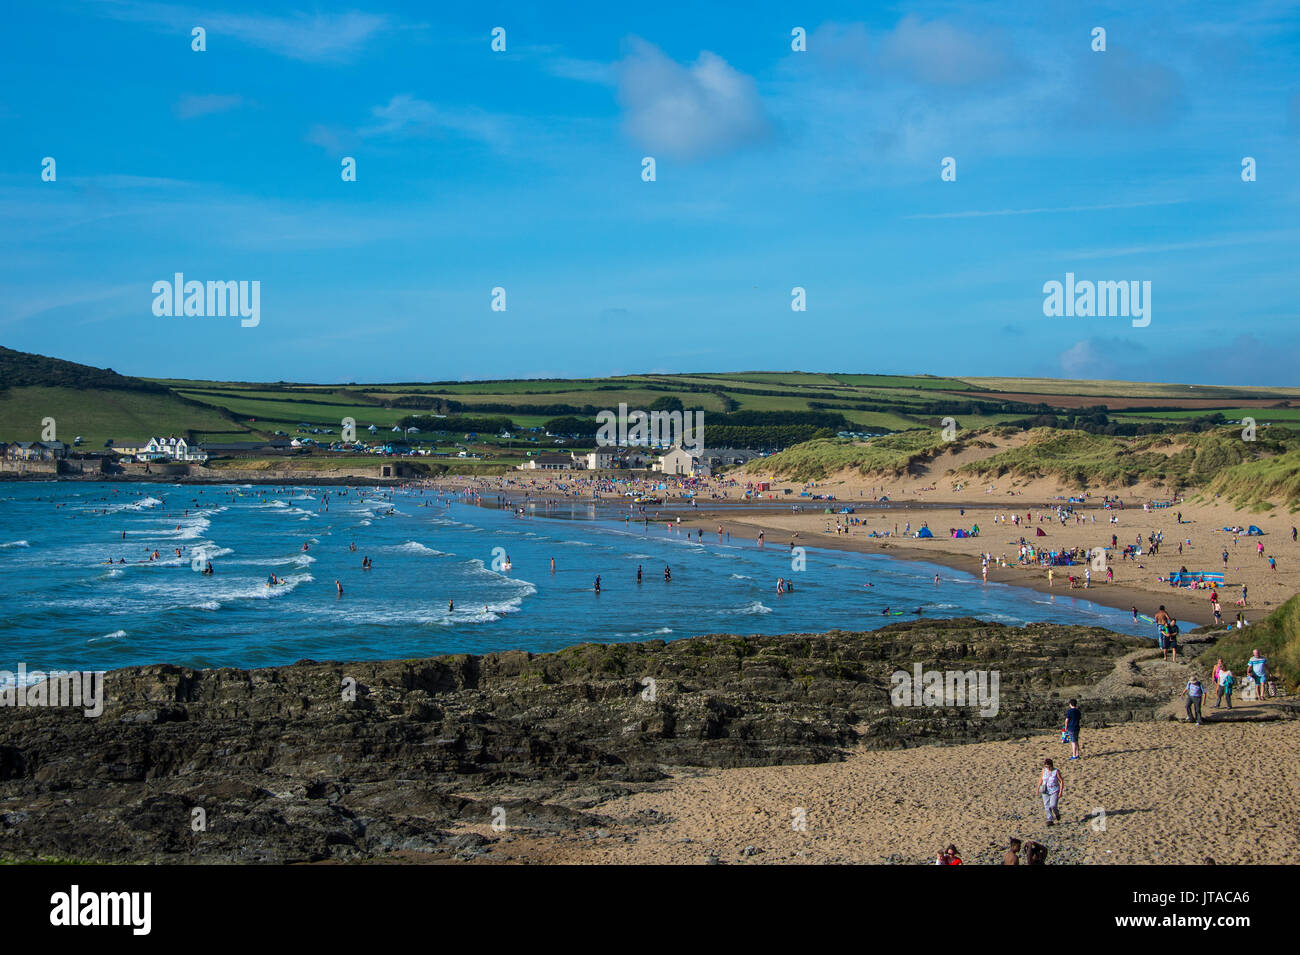 Plage de Croyde, Cornwall, Angleterre, Royaume-Uni, Europe Banque D'Images